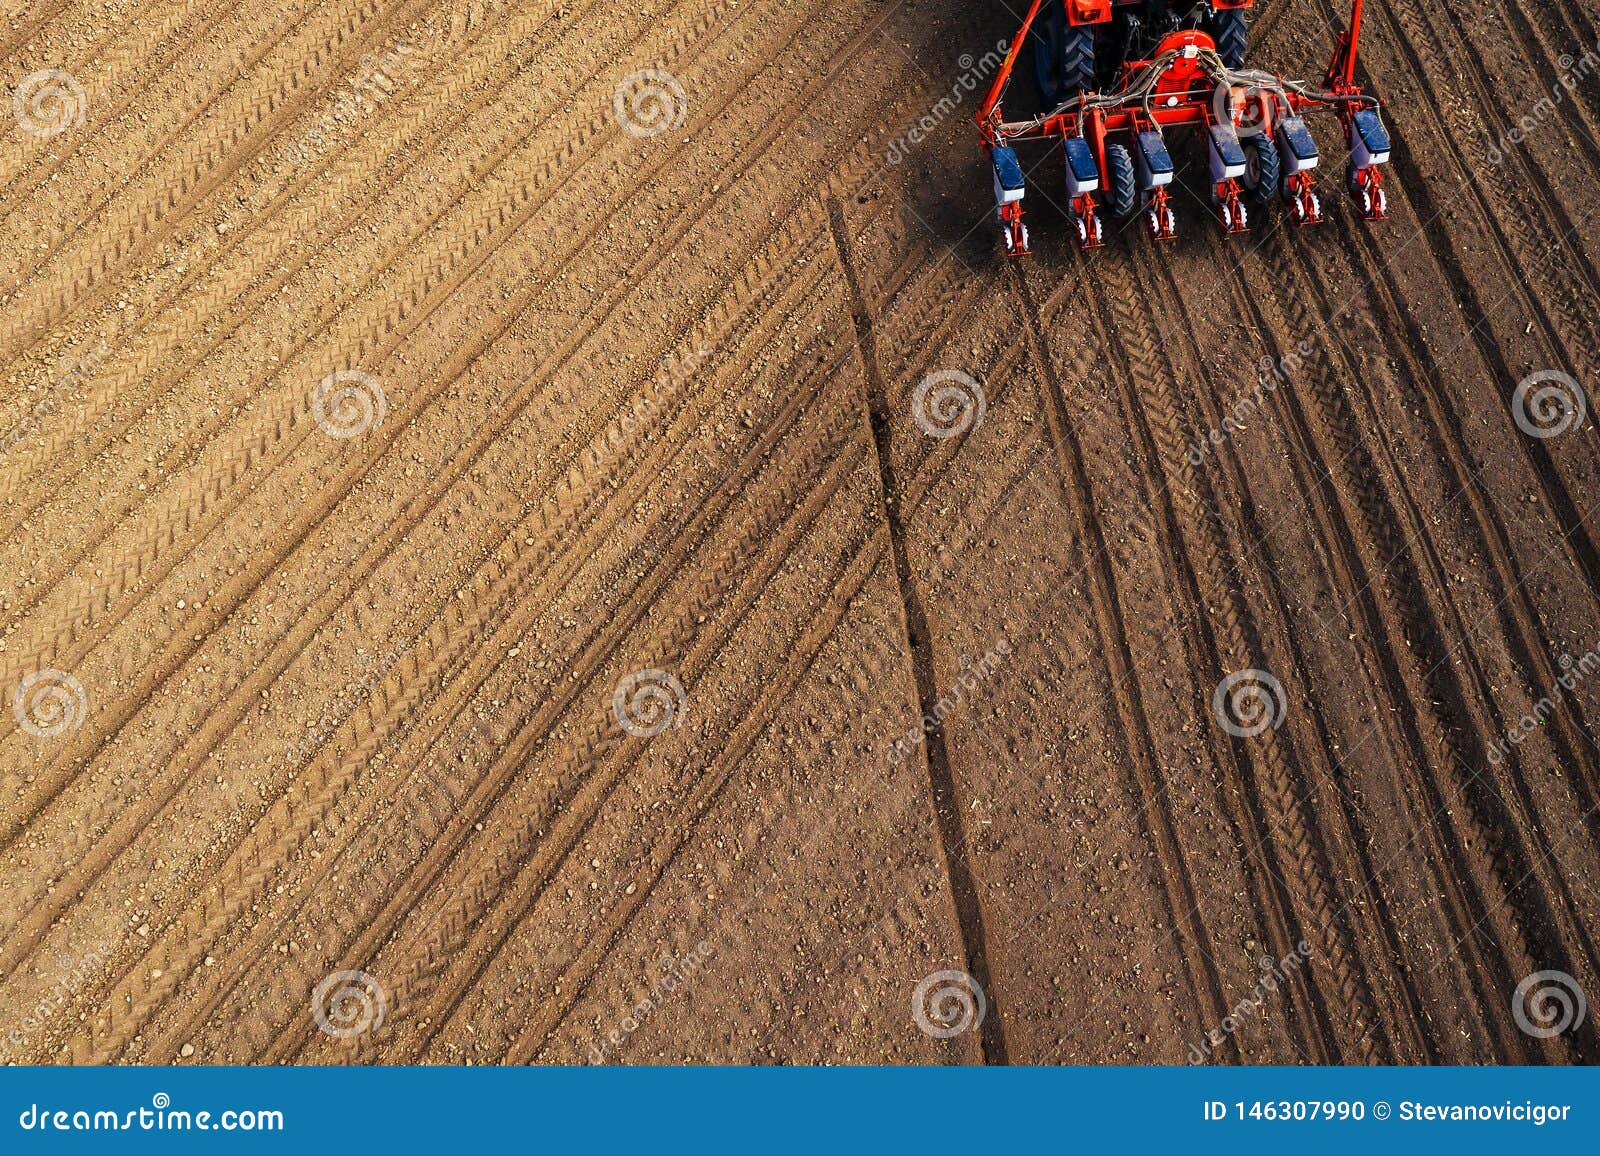 drone pov tractor sowing corn in field